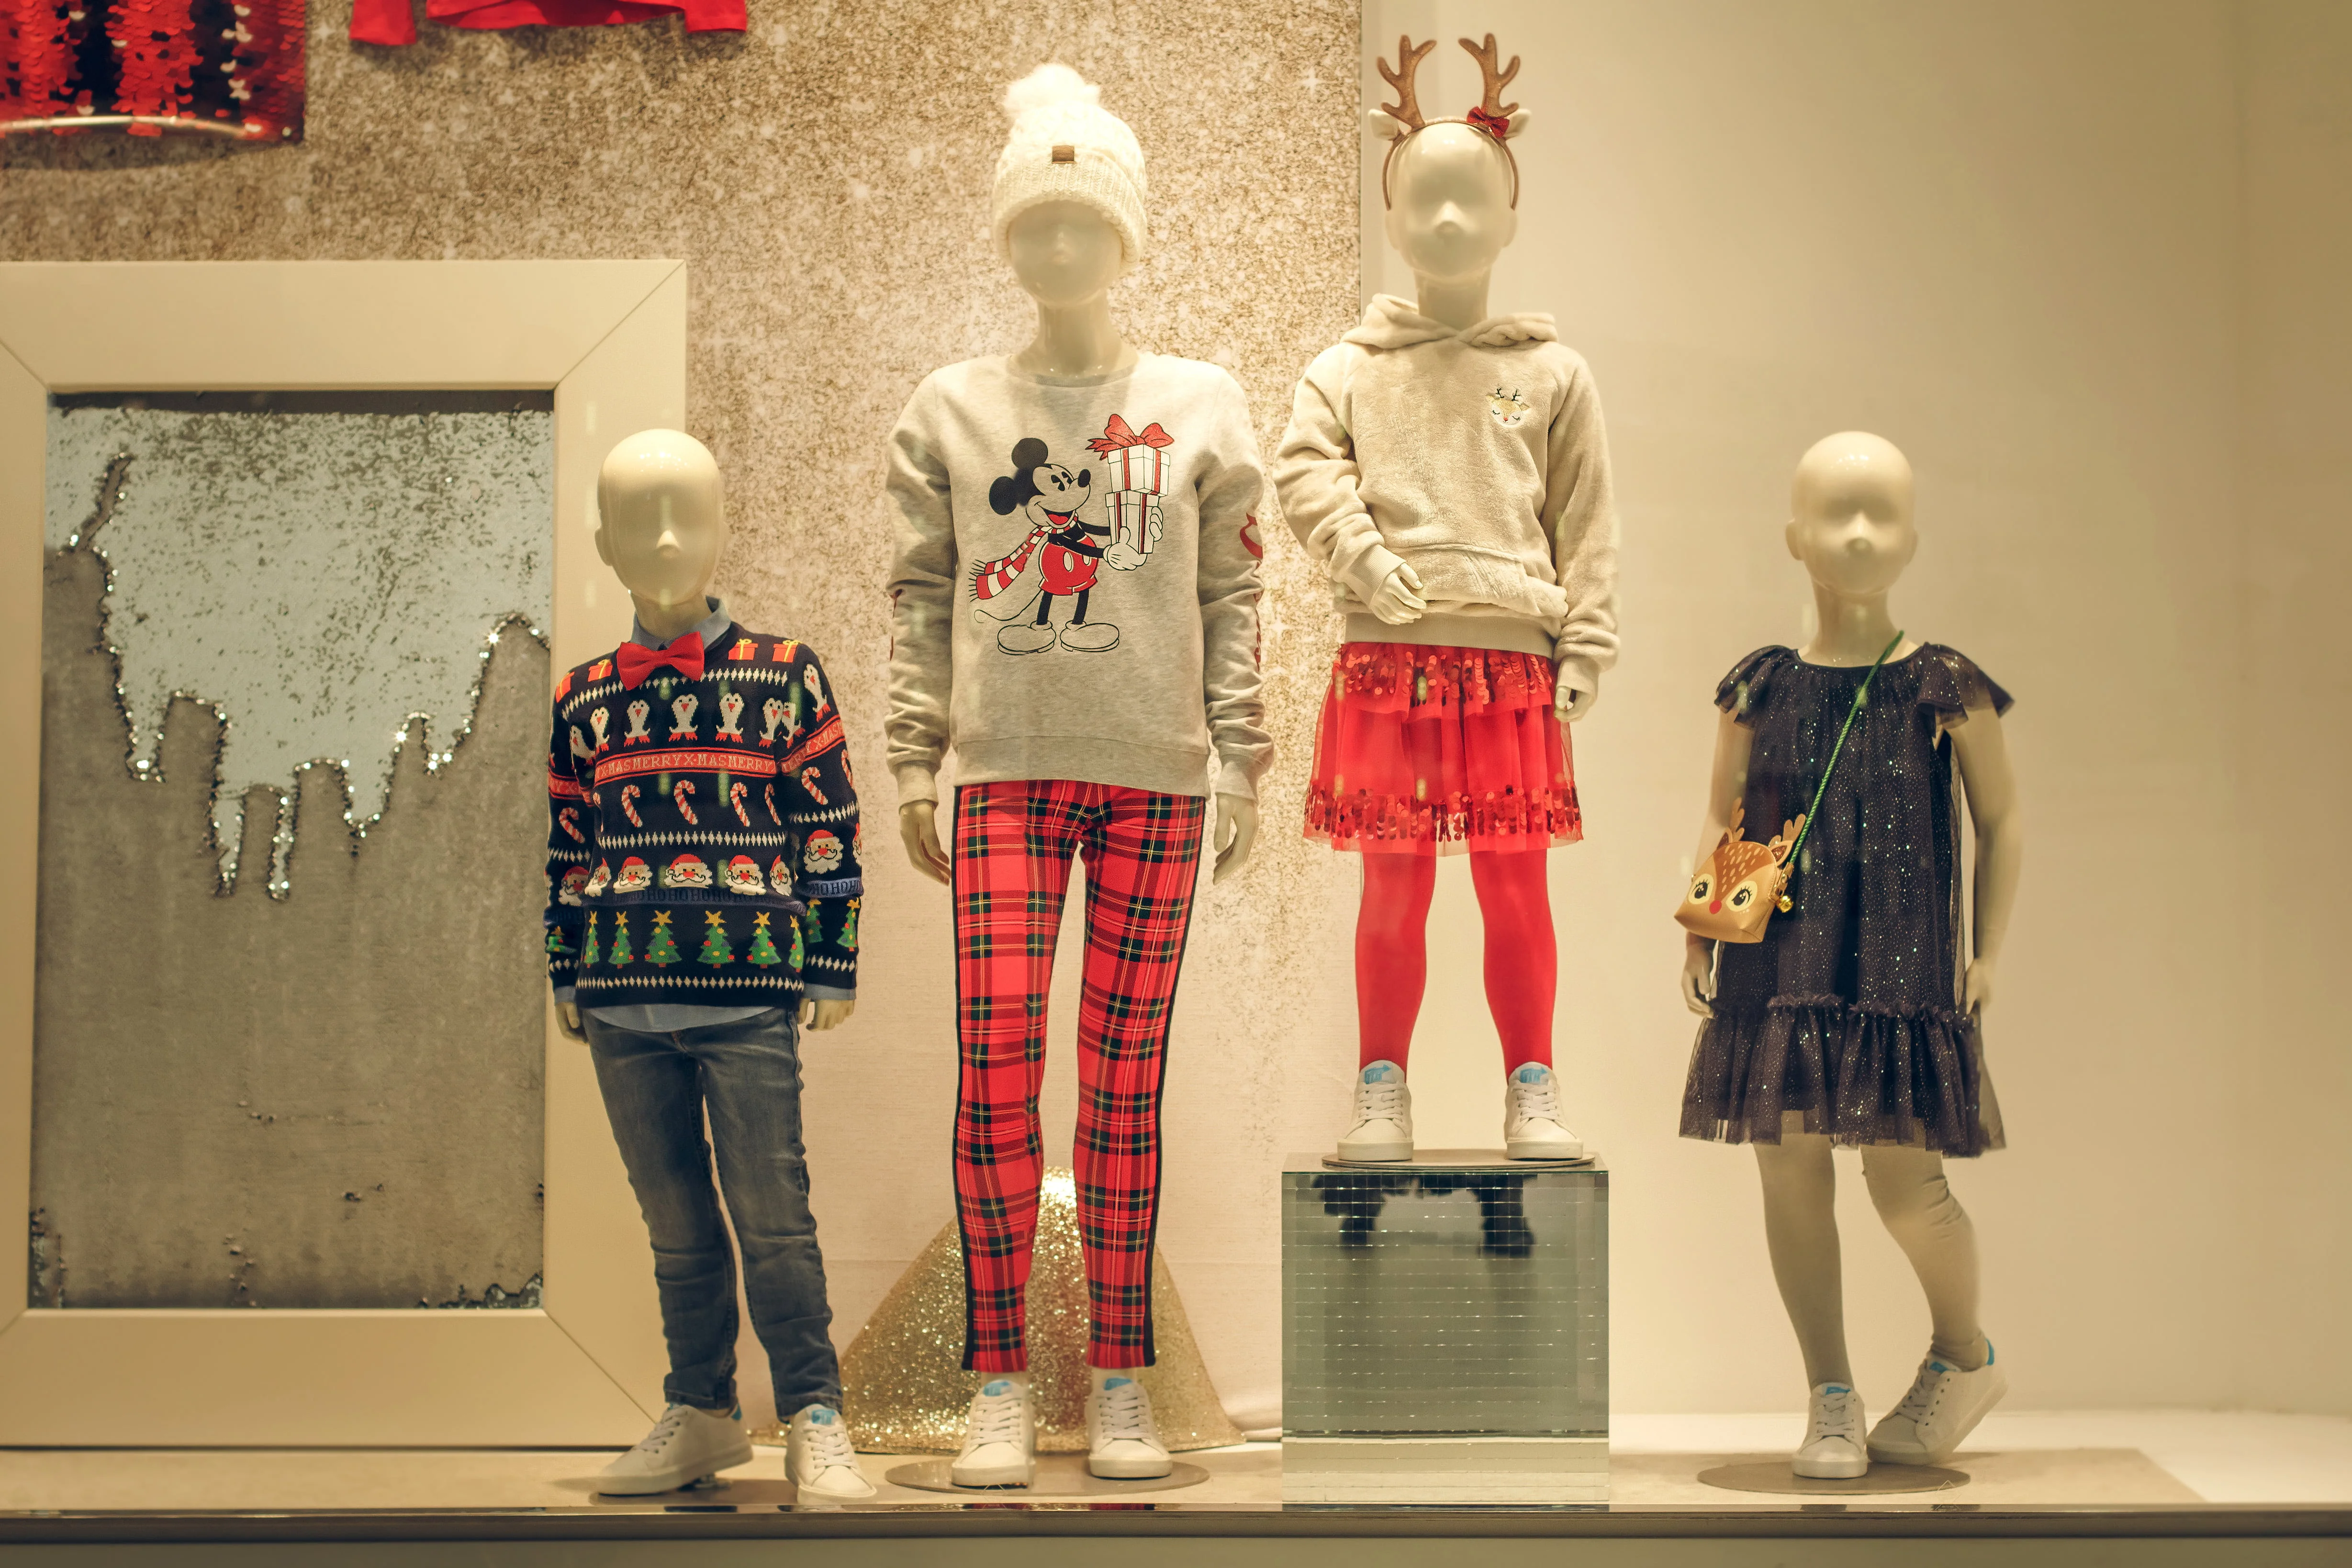 6 Ideas For Merchandising For Christmas With Child Mannequin Displays  Merchandising, Christmas